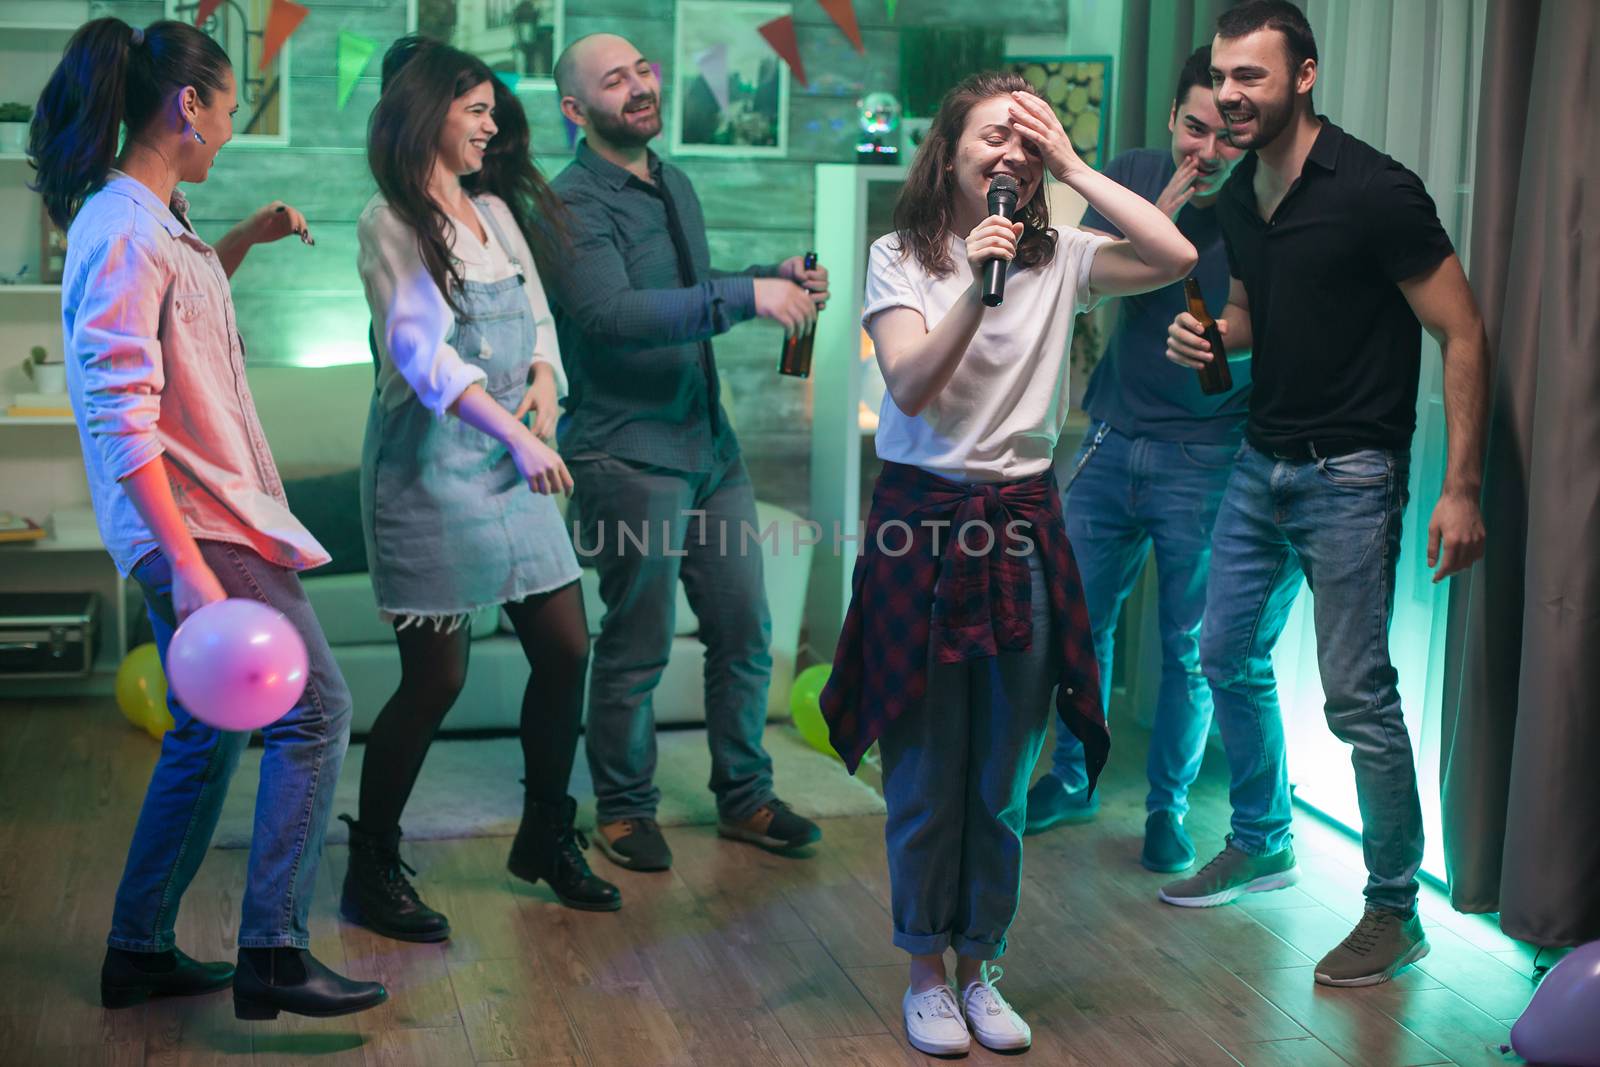 Young woman can't believe she's doing karaoke at her friends party.